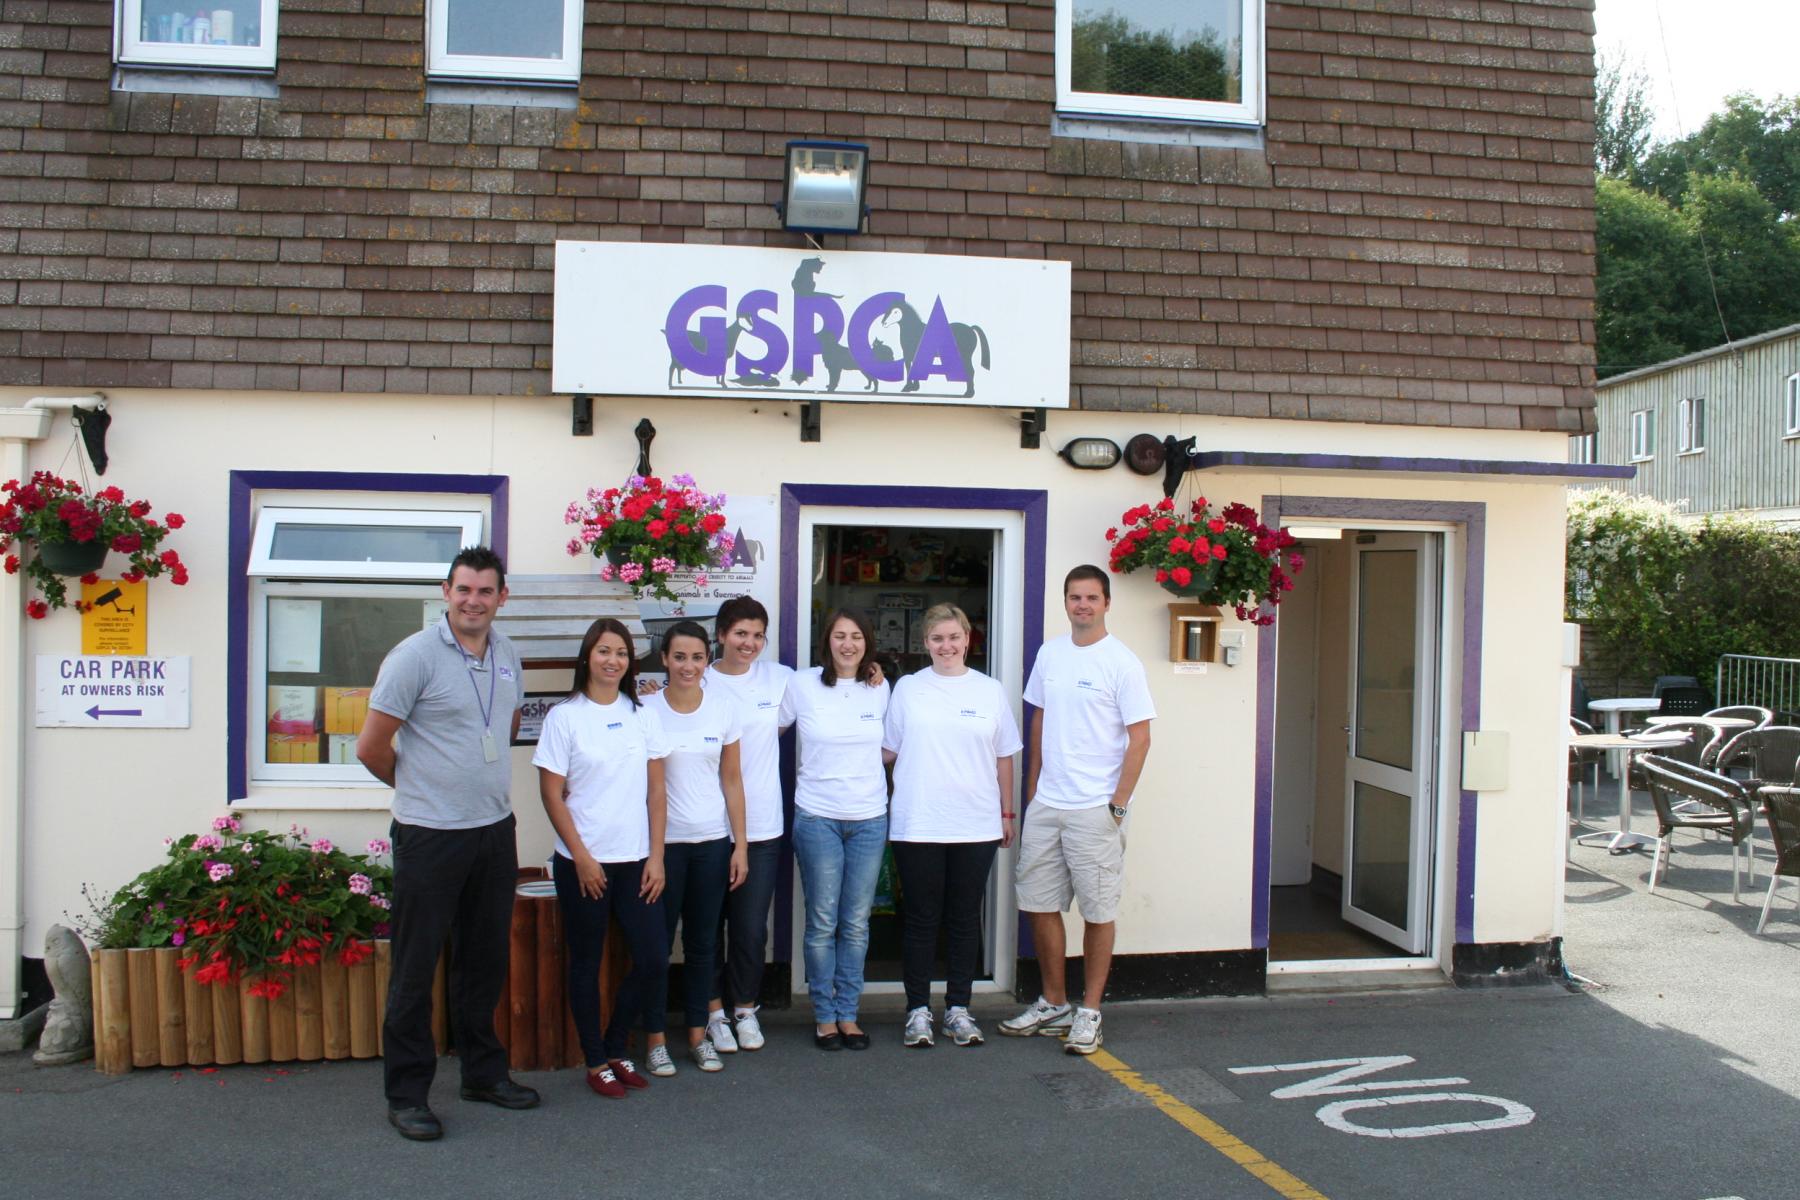 KPMG staff at the GSPCA in Guernsey